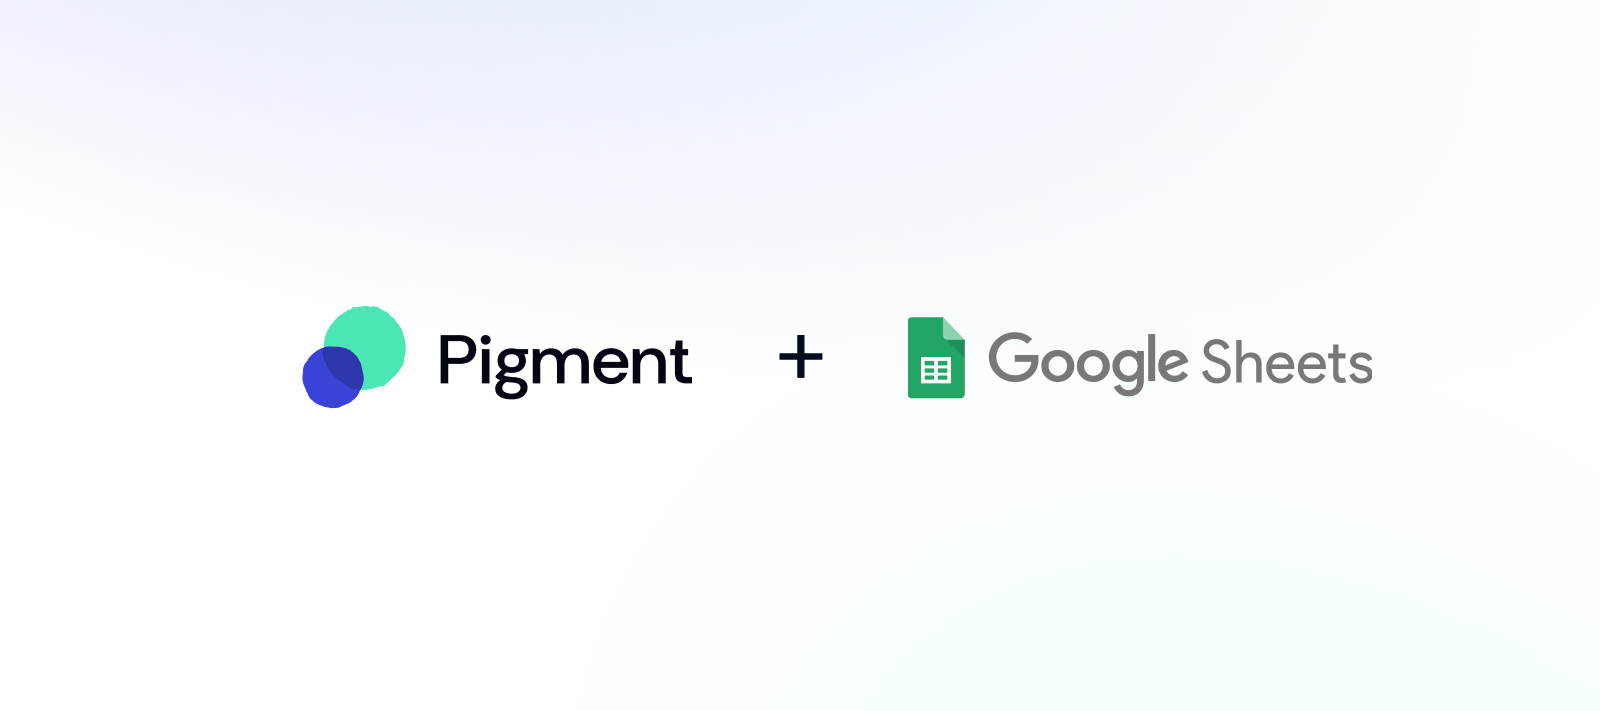 Loading Data from Pigment into Google Sheets (Gsheet)